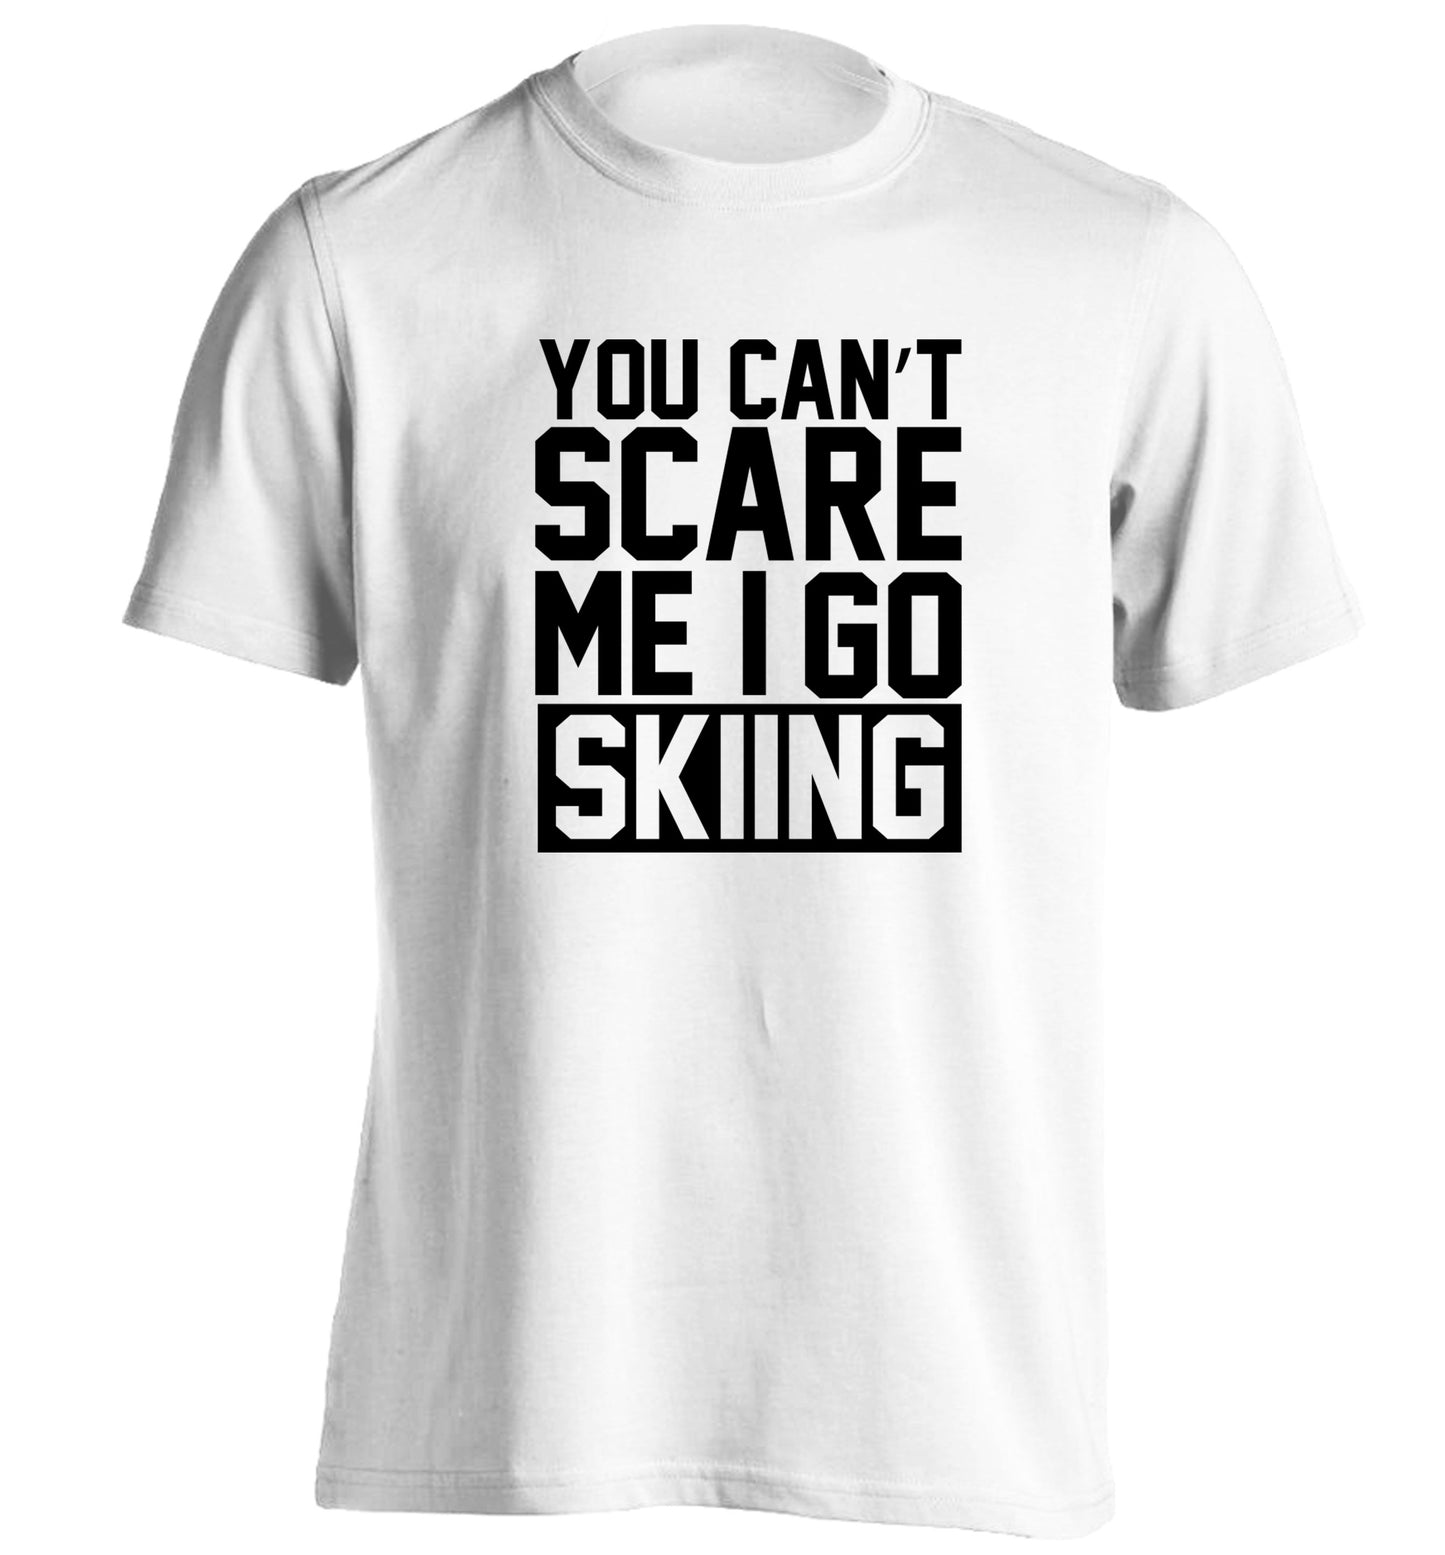 You can't scare me I go skiing adults unisex white Tshirt 2XL